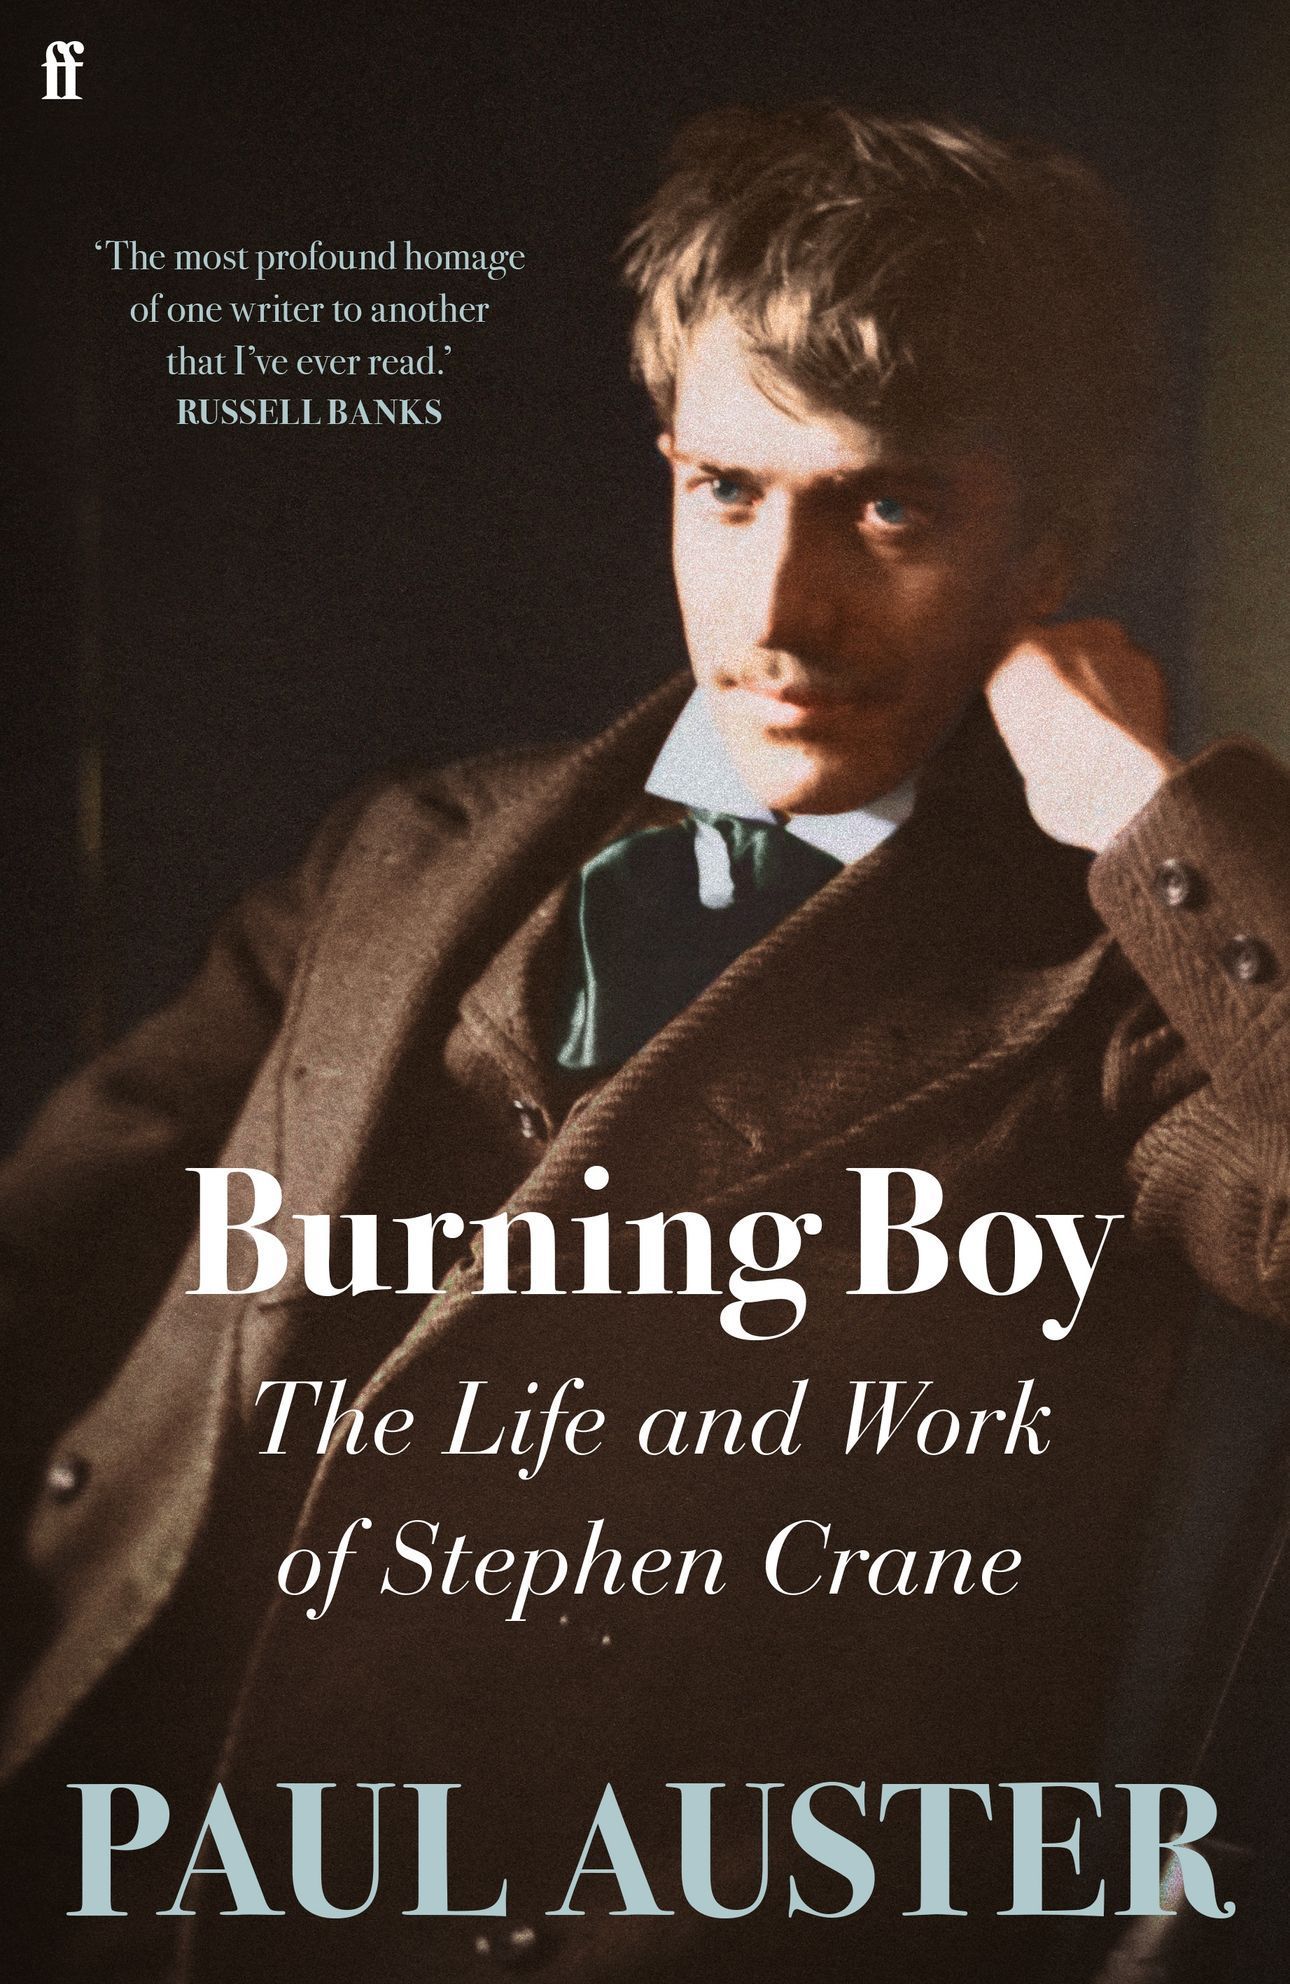 Paul Auster: Burning Boy – The Life and Work of Stephen Crane